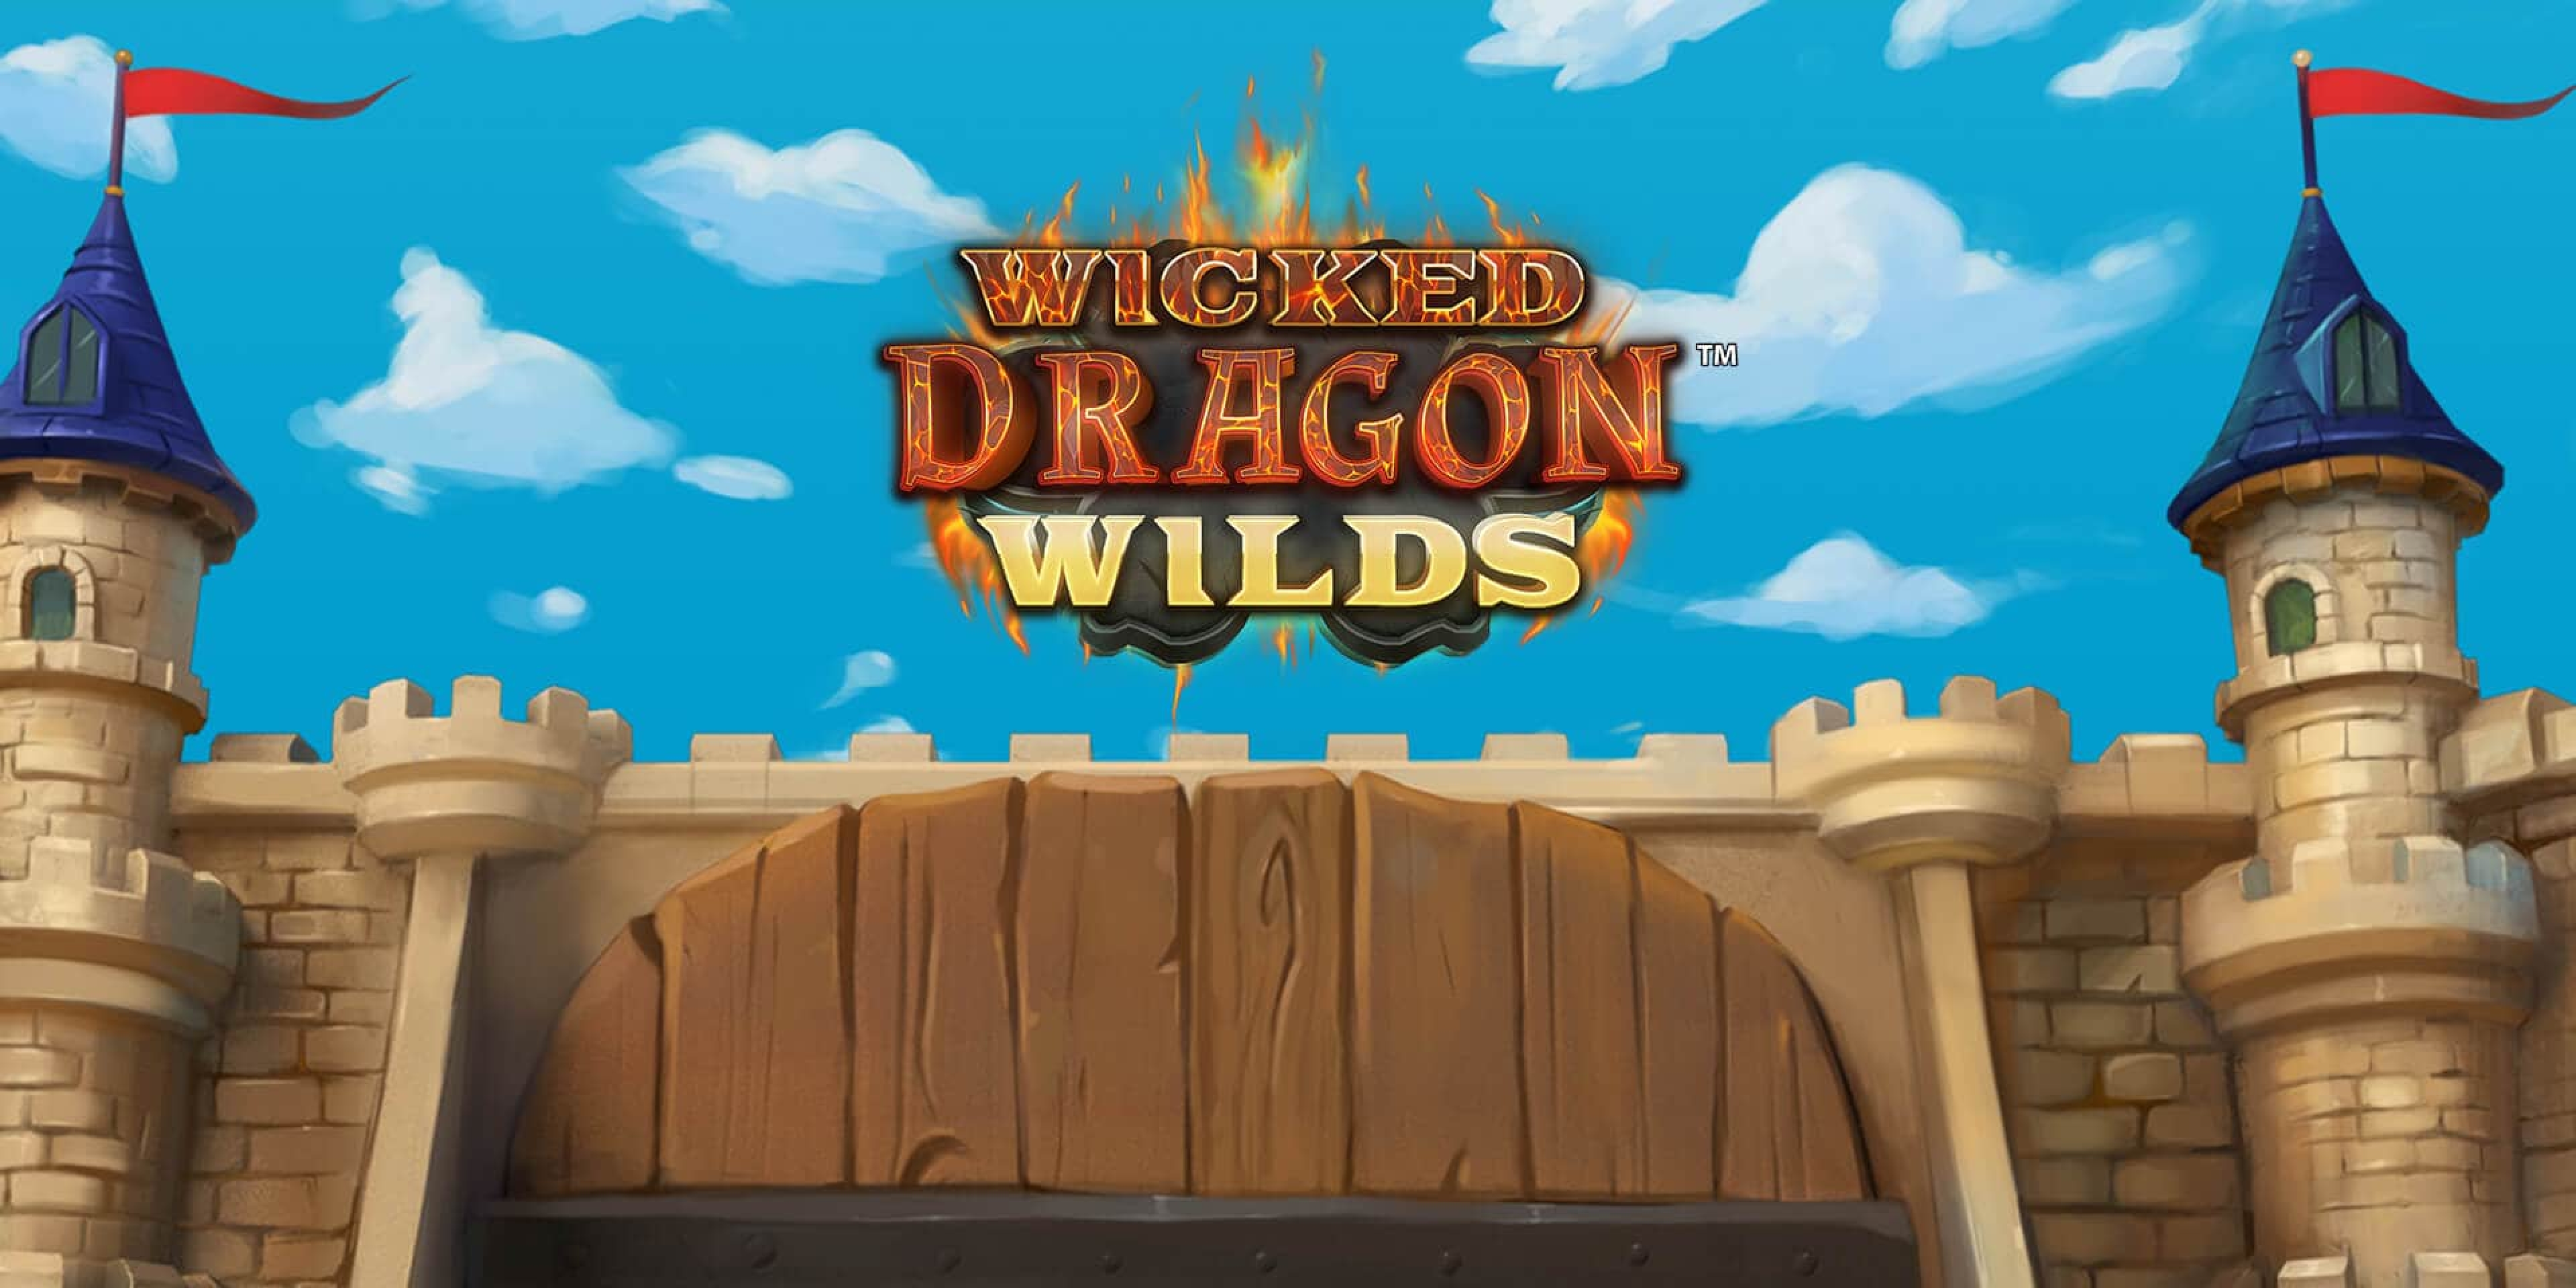 Wicked Dragon Wilds demo